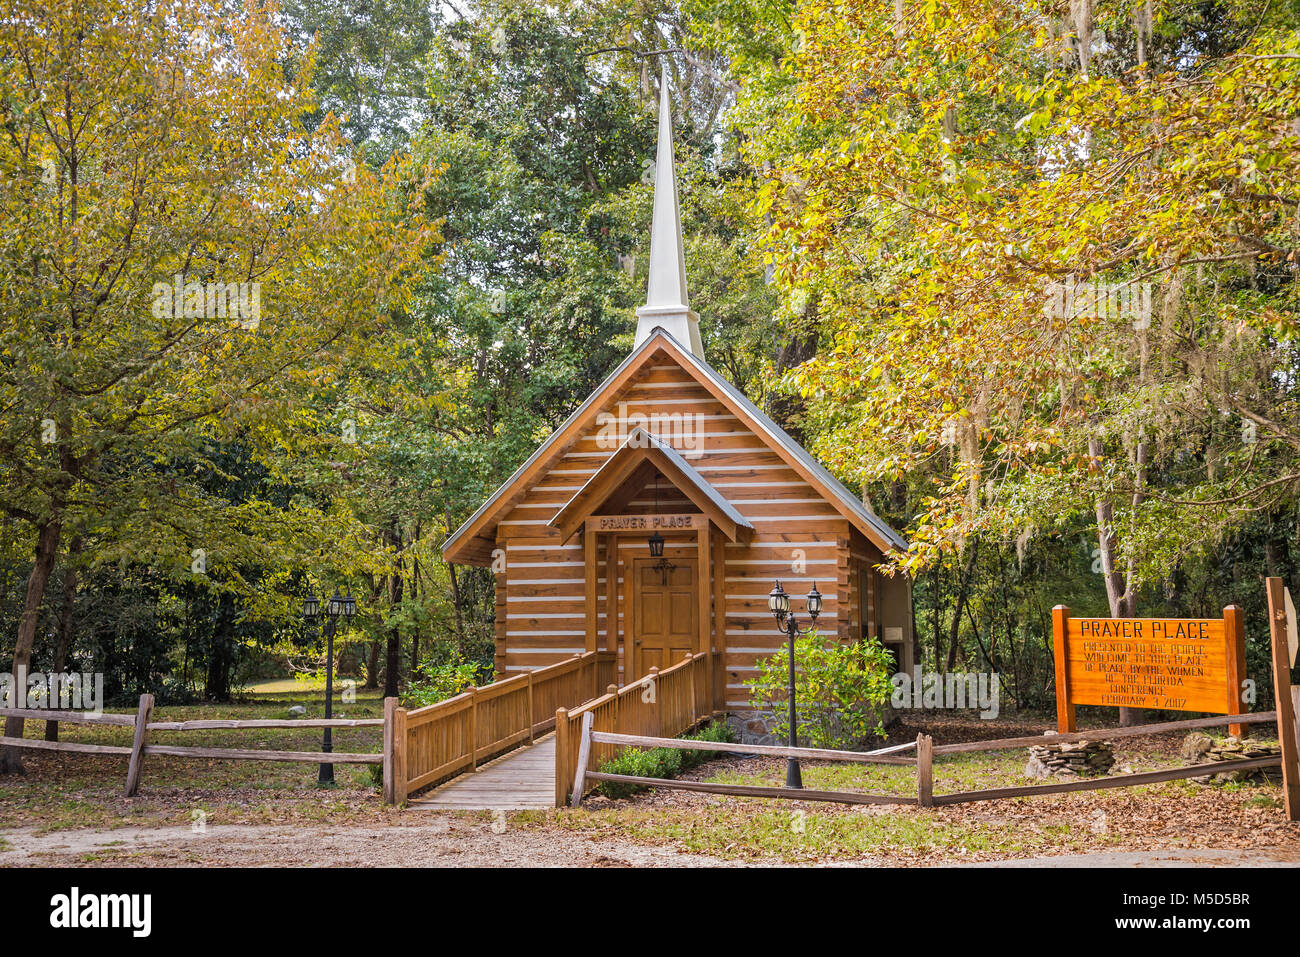 Camp Kulaqua is a 7th Day Adventist Church retreat area covering 600 acres, located just outside the town of High Springs in North Central Florida. Stock Photo